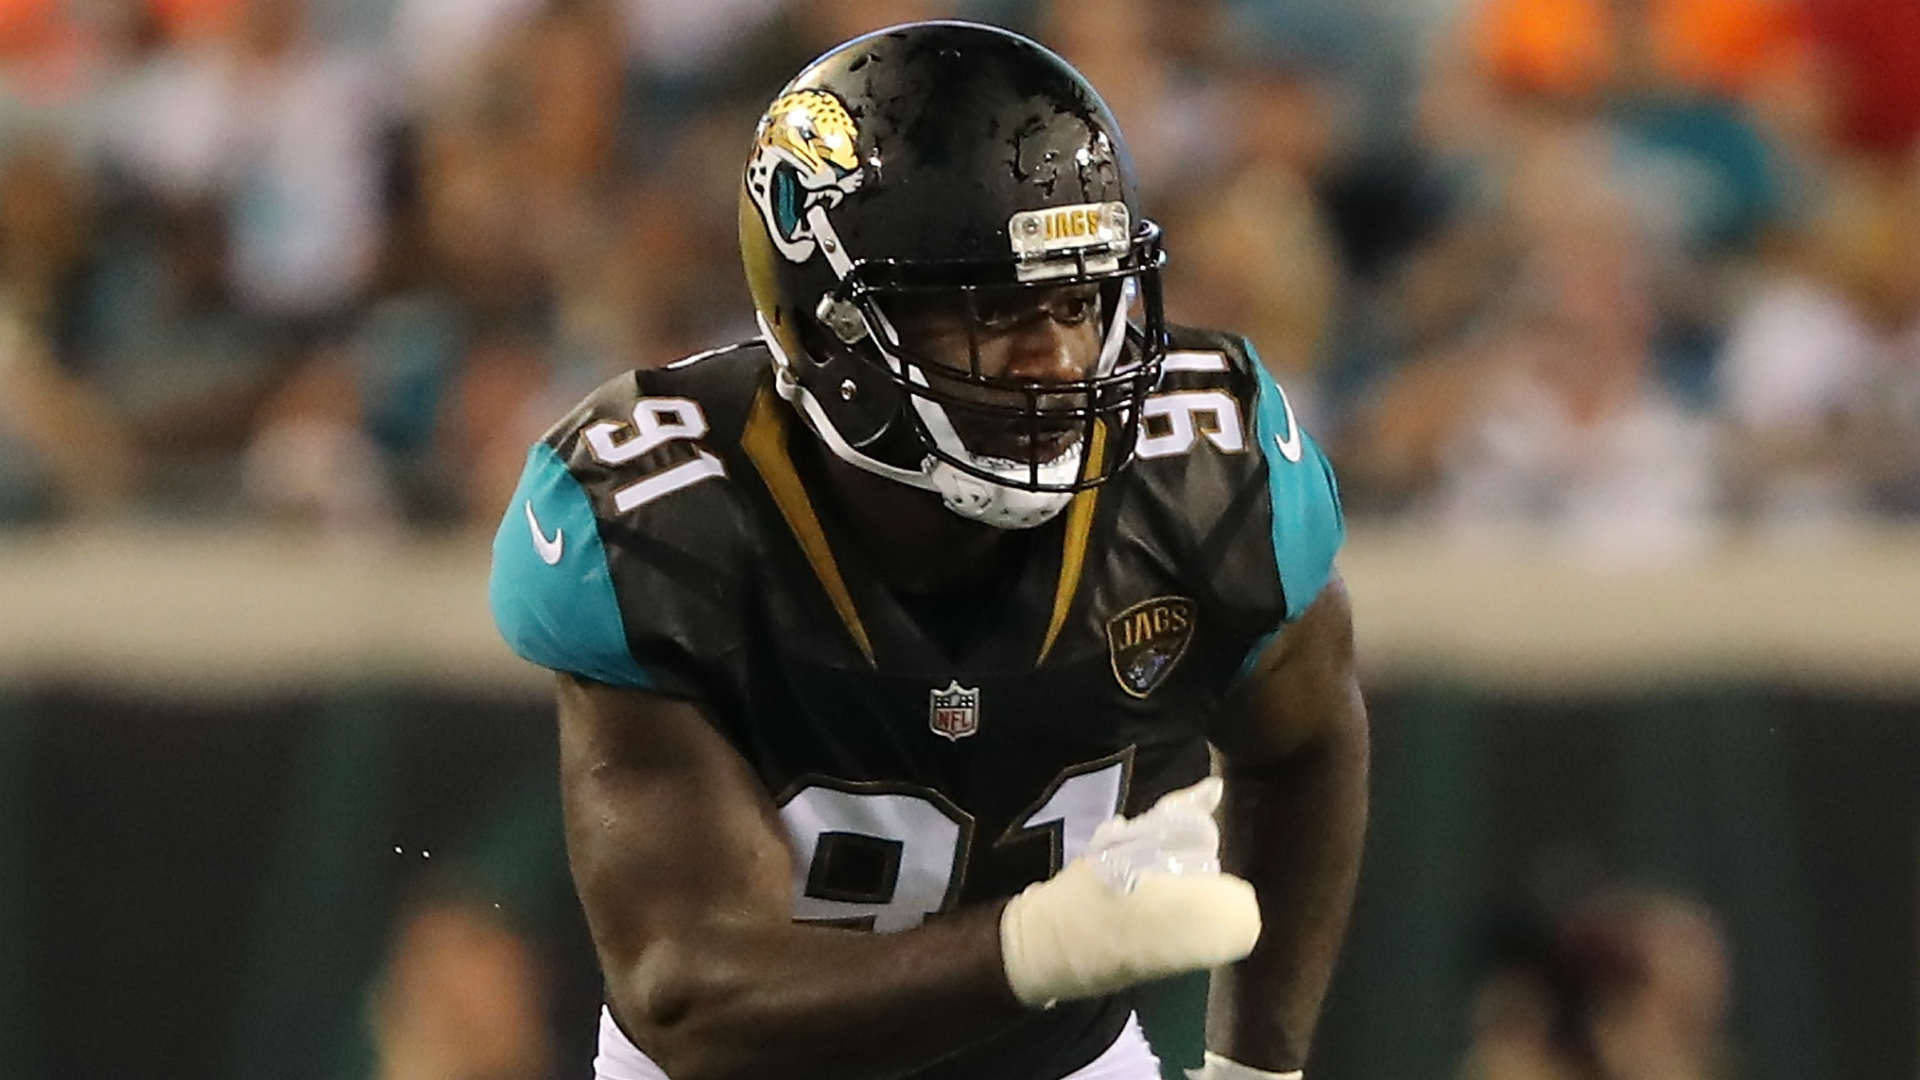 "My contract has not been resolved," said Yannick Ngakoue as he confirmed he would miss mandatory minicamp this week.